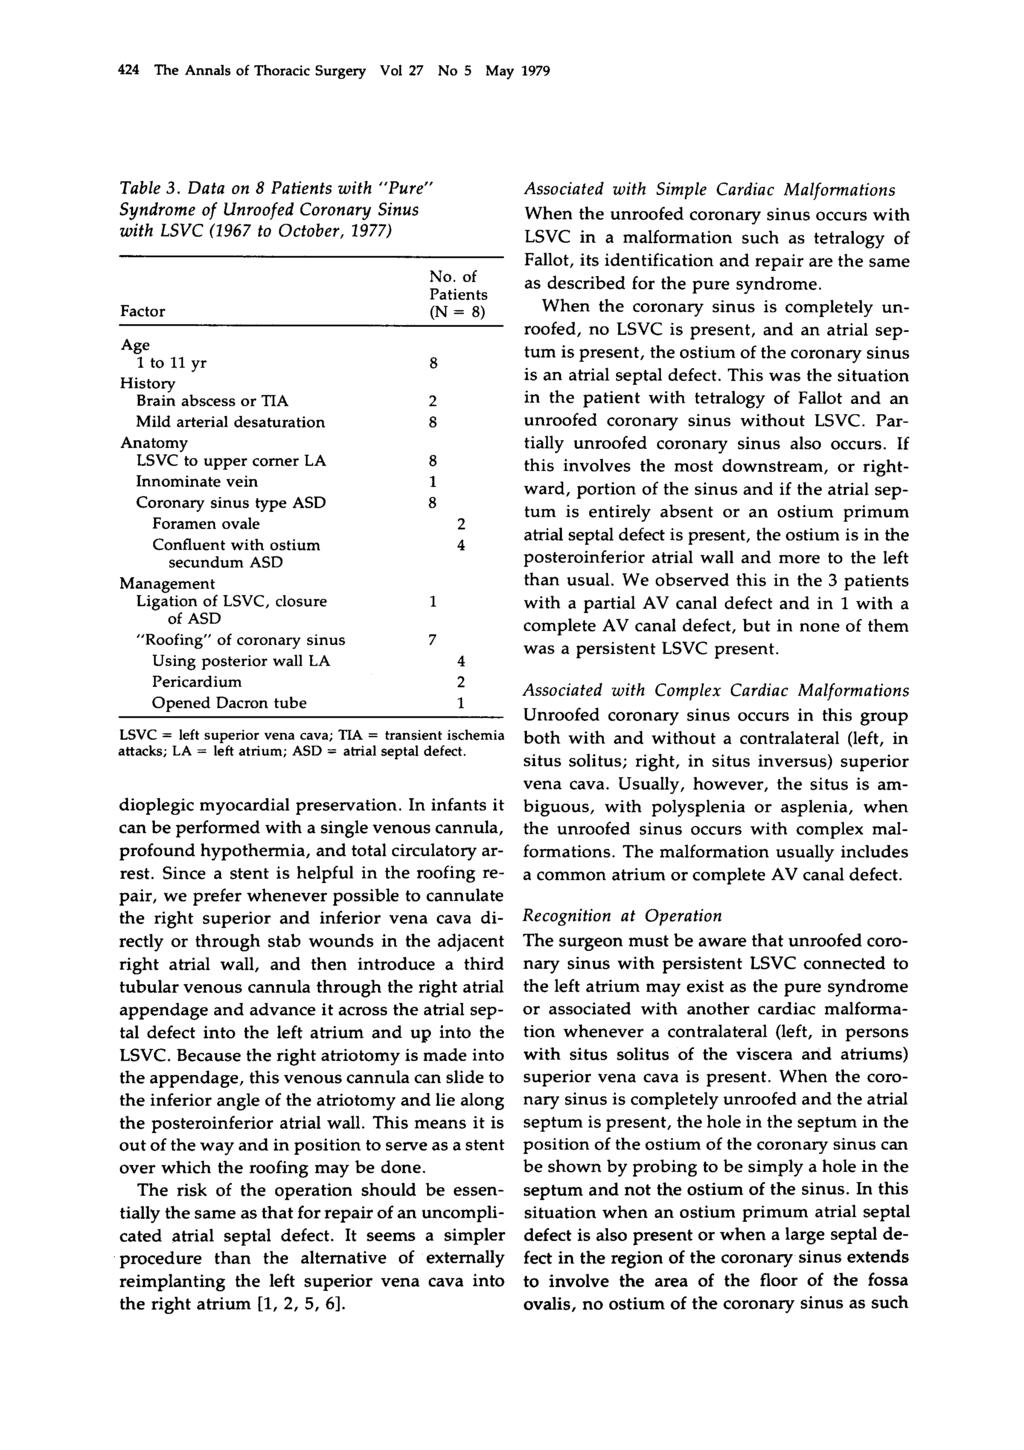 424 The Annals of Thoracic Surgery Vol 27 No 5 May 1979 Table 3. Data on 8 Patients with "Pure" Syndrome of Unroofed Coronary Sinus with LSVC (2967 to October, 2977) Factor No.